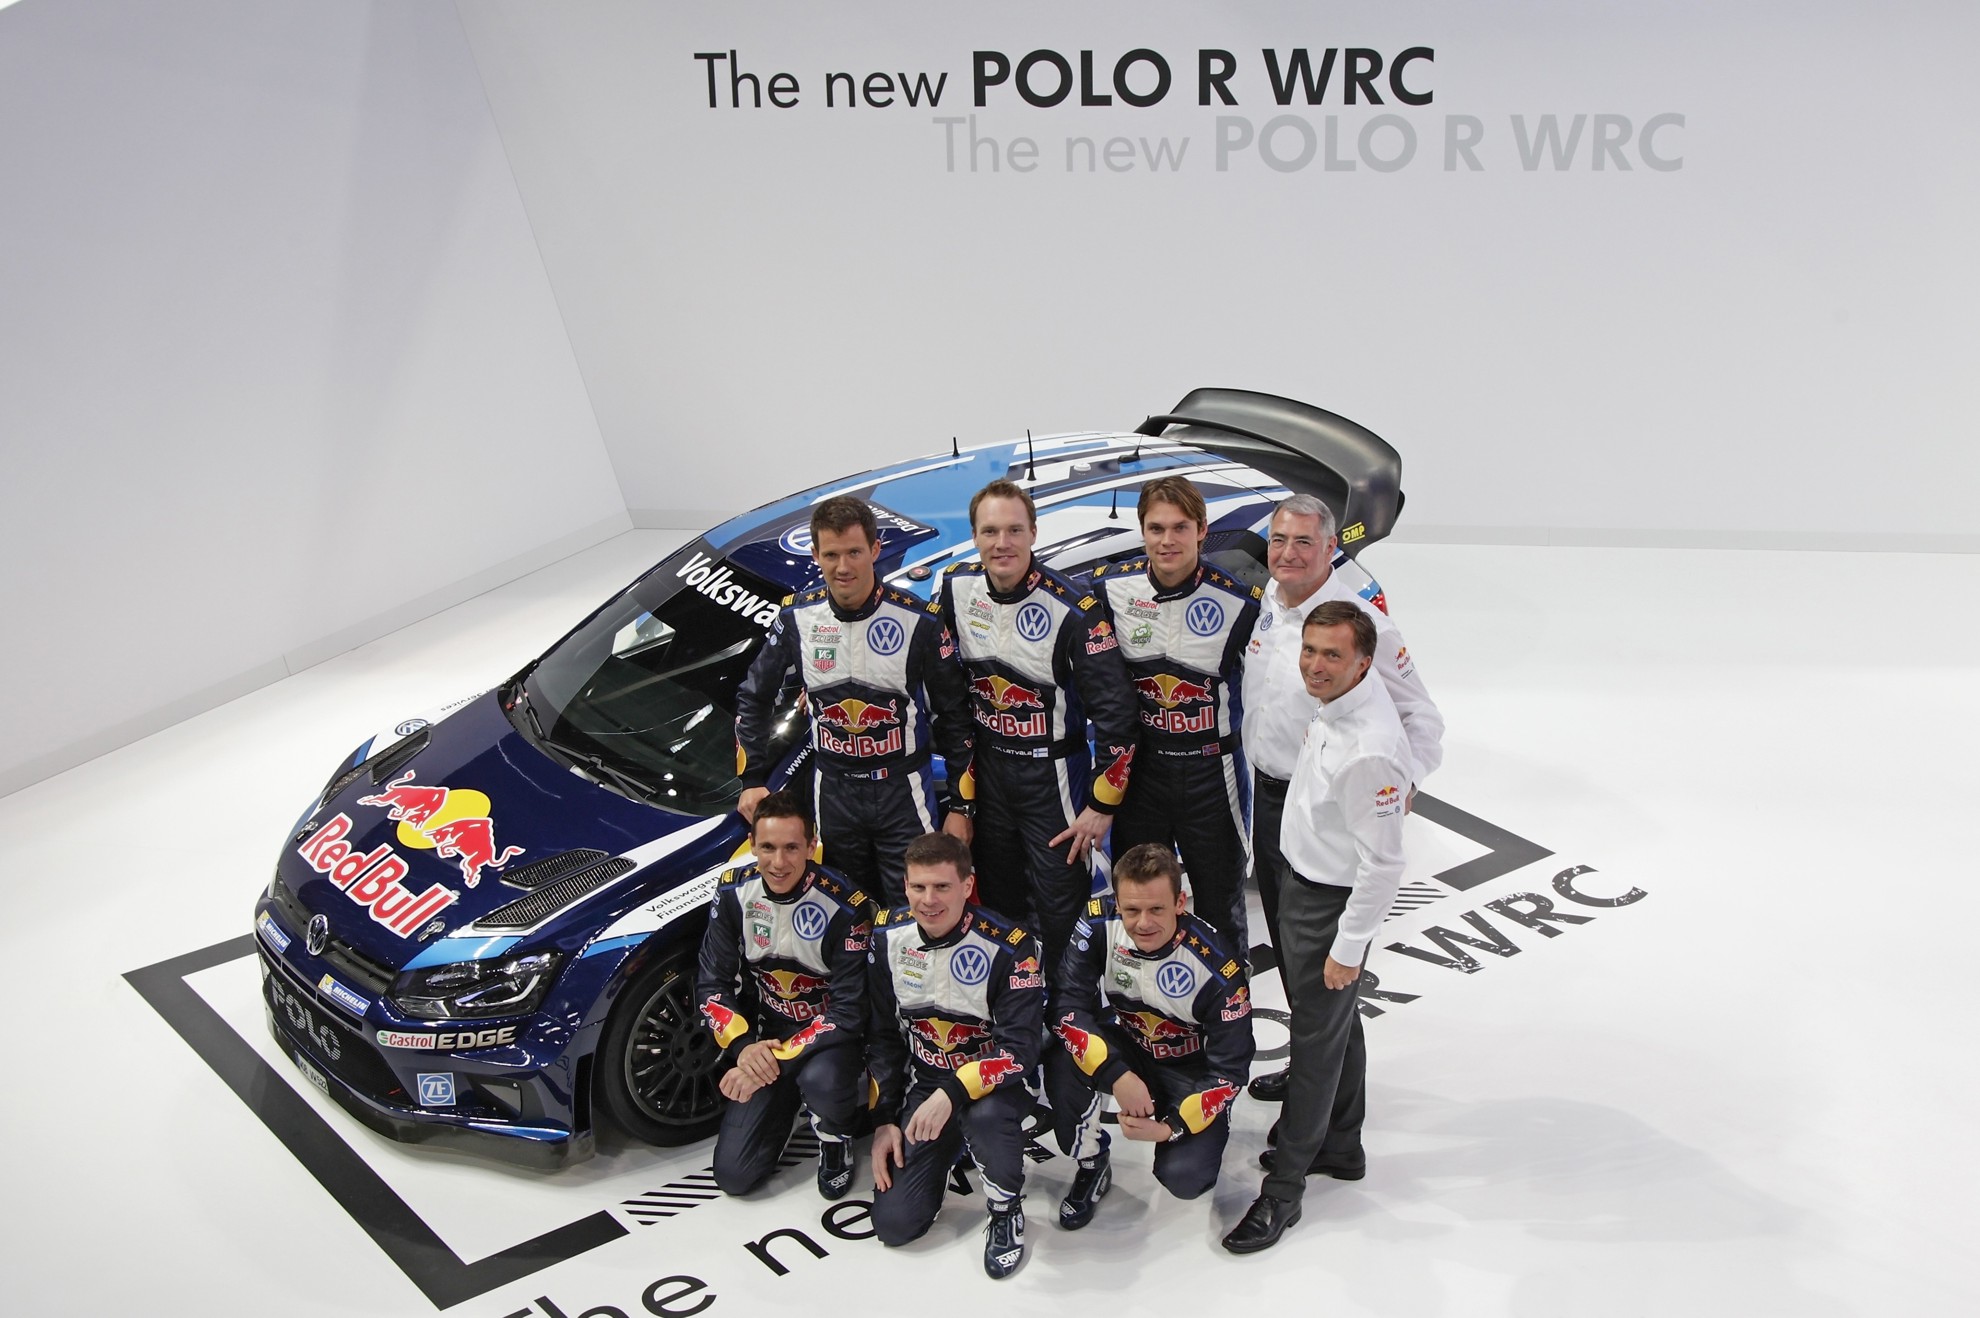 NEW TECHNOLOGY, NEW DESIGN: PRESENTING THE SECOND GENERATION POLO R WRC